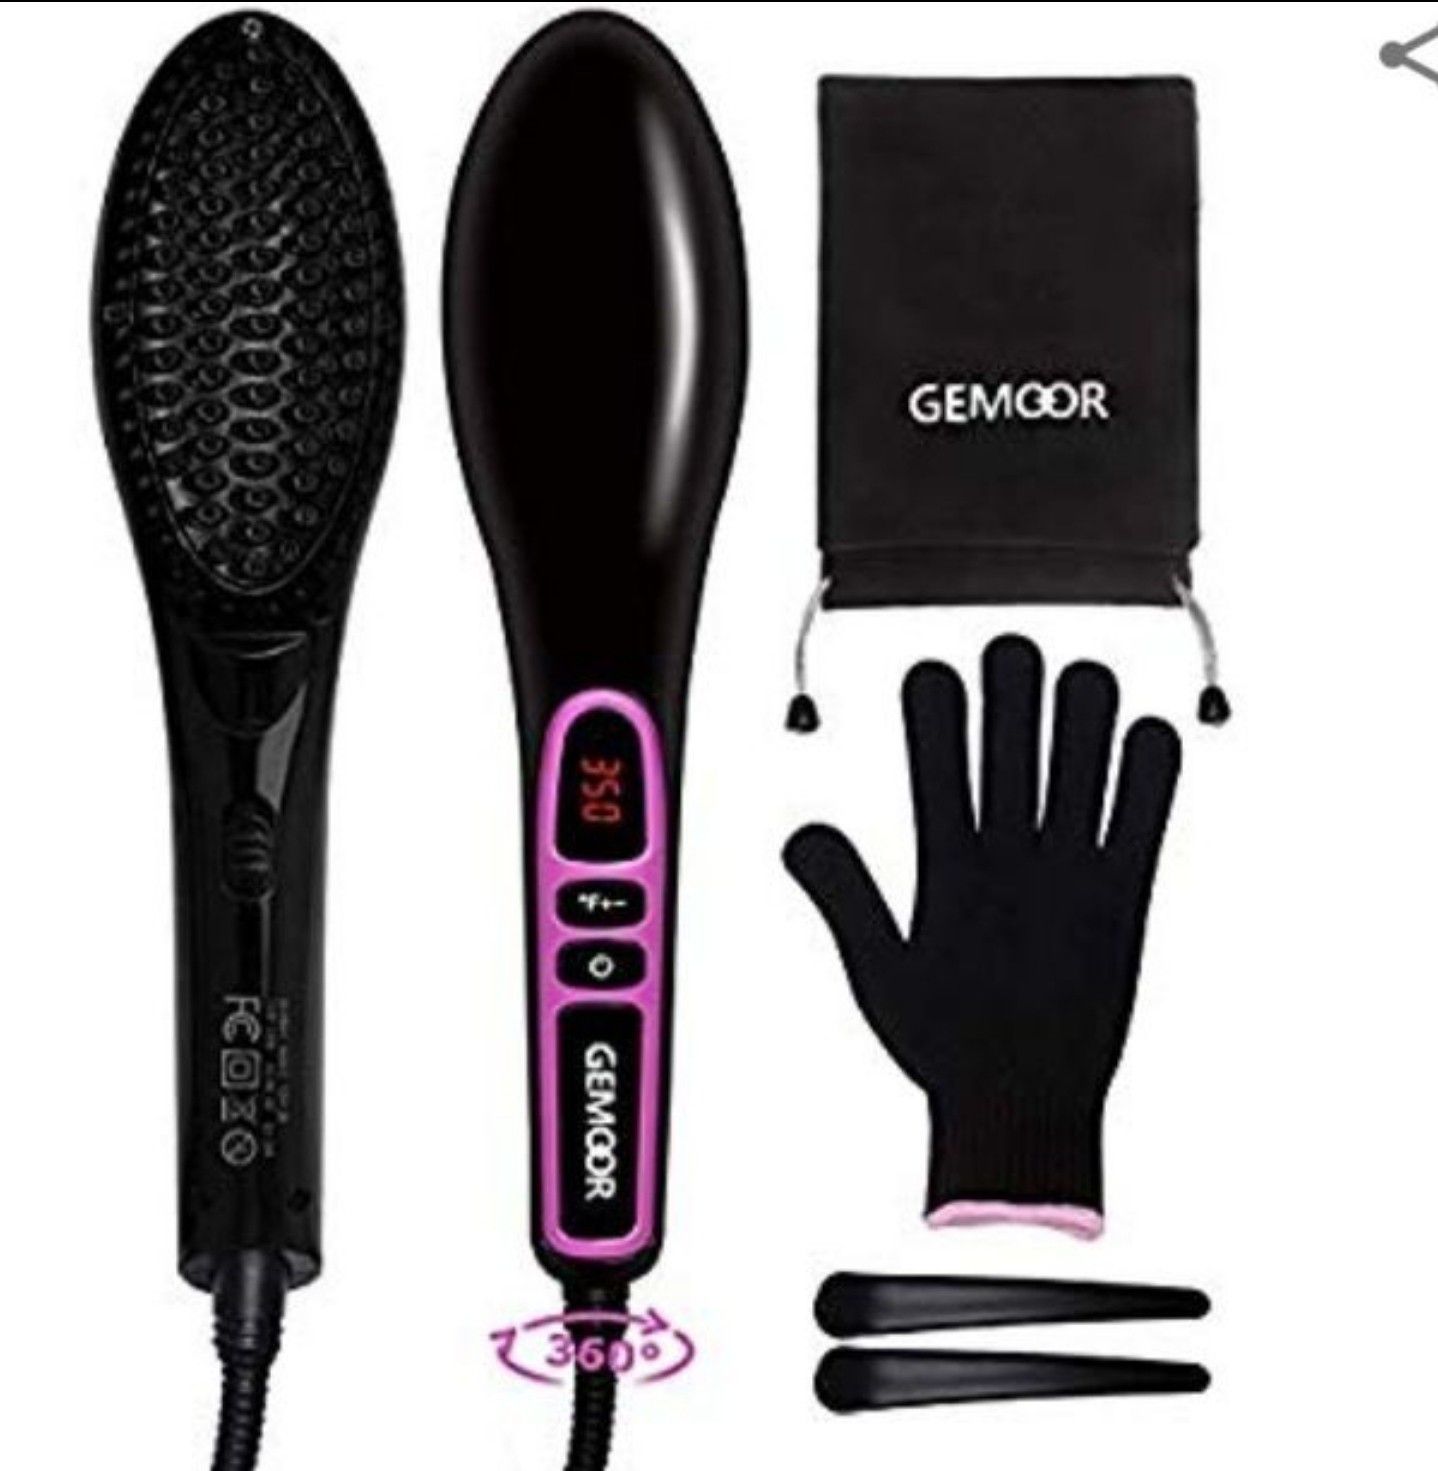 Instant Styling GeMoor Ionic Hair Straightening Brush with Fast Heating 100% Safe Off Function 8 Adjustable Temperatures, Eliminate Frizz Silky